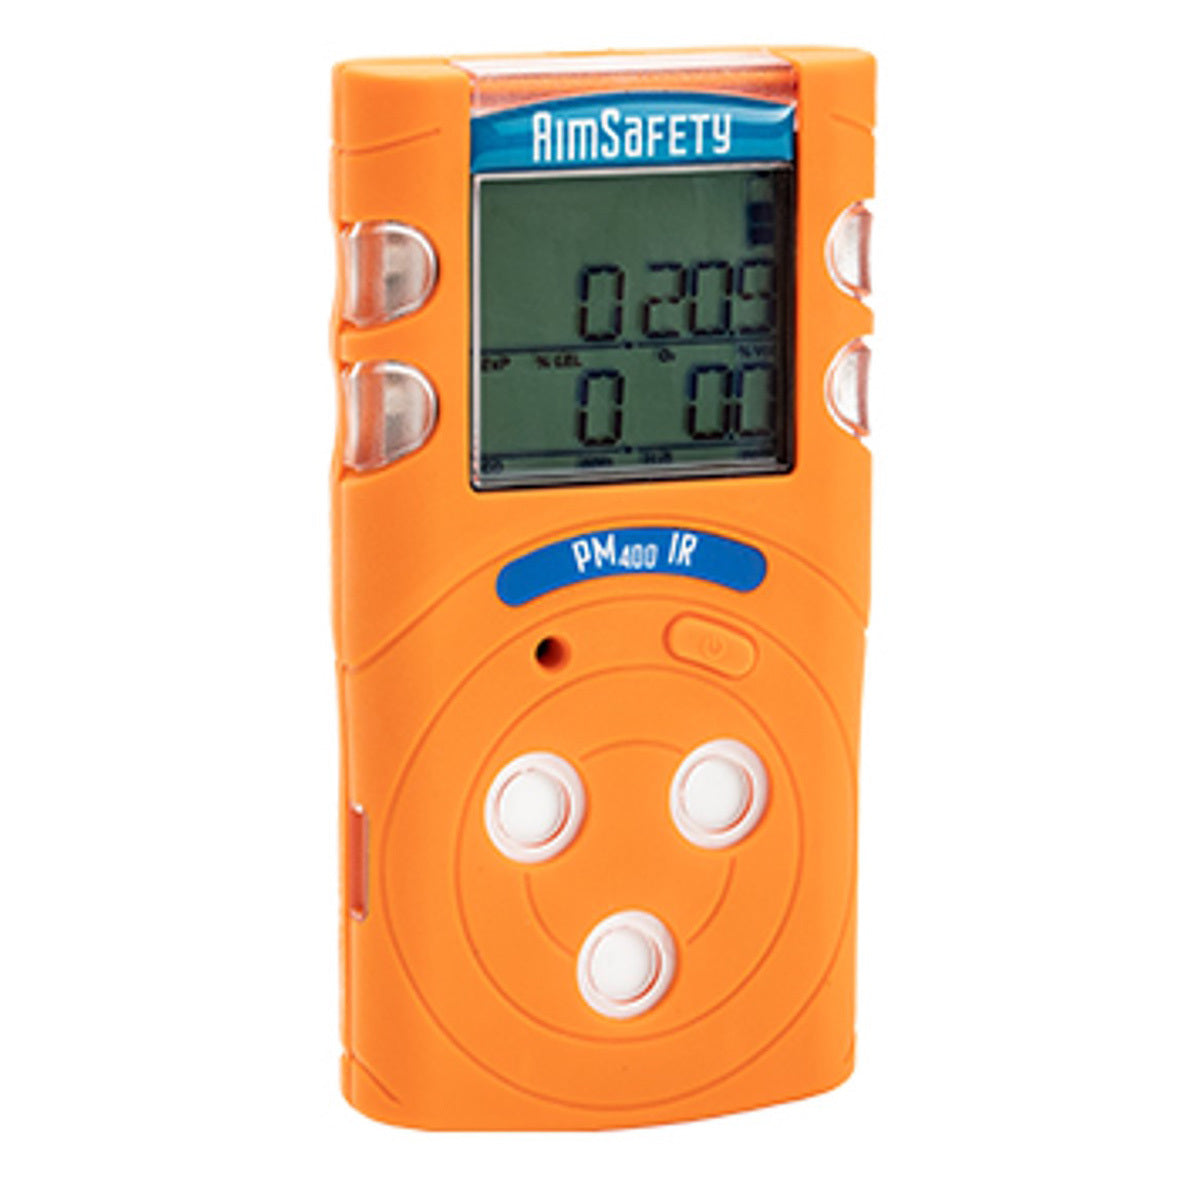 Macurco™ Gas Detection AimSafety™ PM400-IR Portable Combustible Gases, Carbon Monoxide, Hydrogen Sulfide, Oxygen Detector-eSafety Supplies, Inc